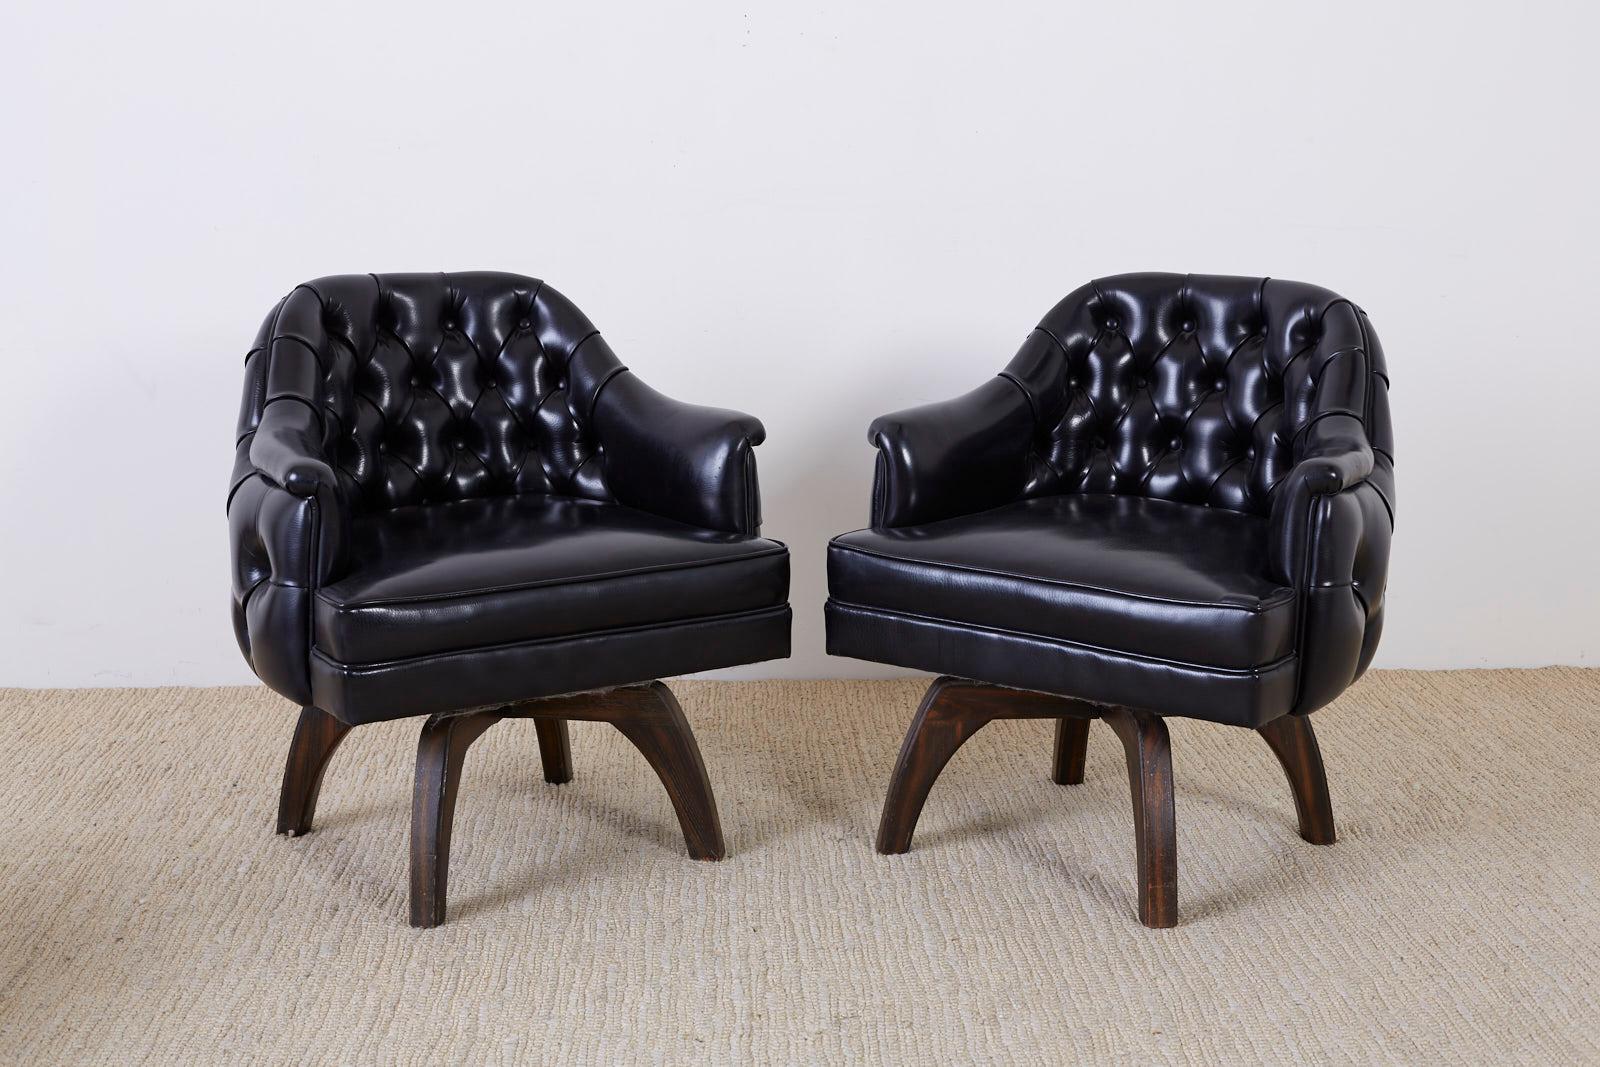 Set of Three Mid Century Tufted Black Leatherette Club Chairs  In Good Condition For Sale In Rio Vista, CA